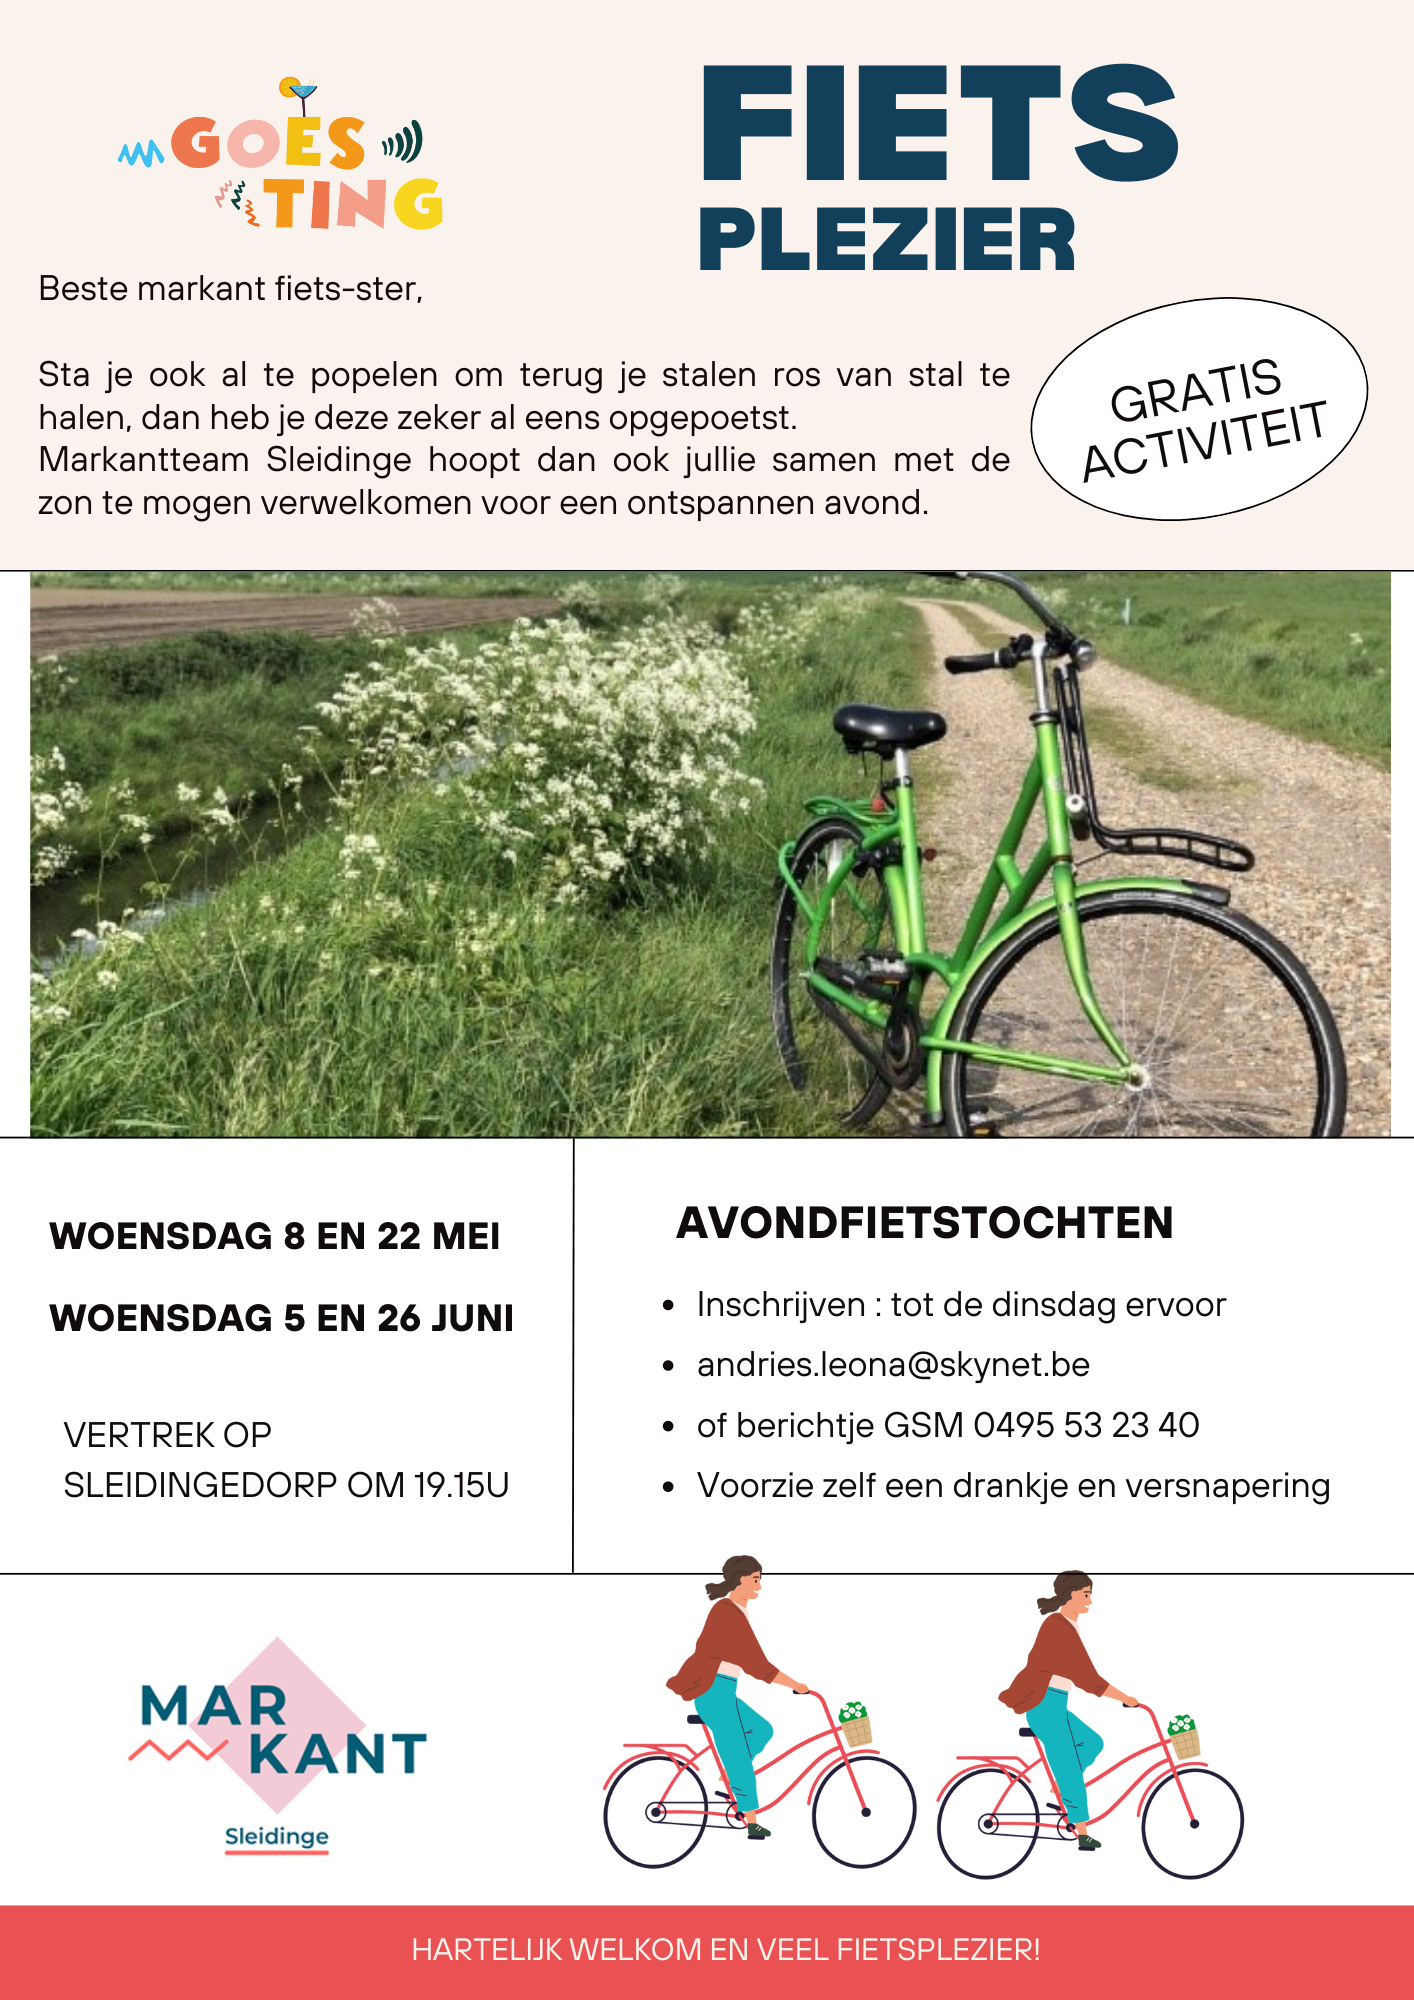 https://madyna.be/storage/activity_photos/66522263855b2/Markant uitnodiging FIets plezier.png